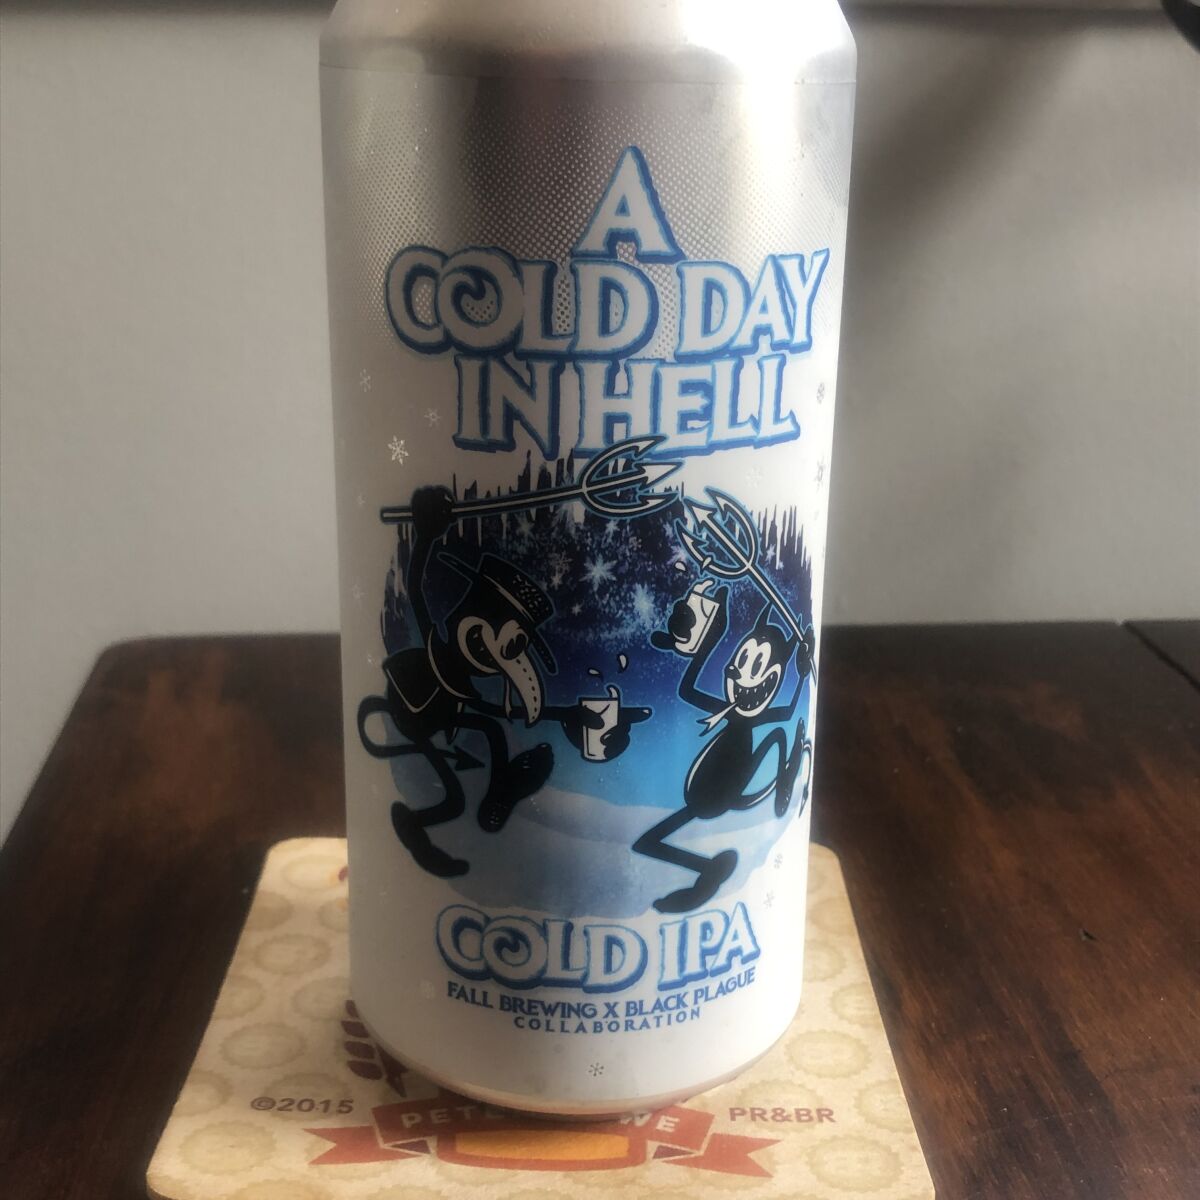 A new IPA called A Cold Day in Hell.